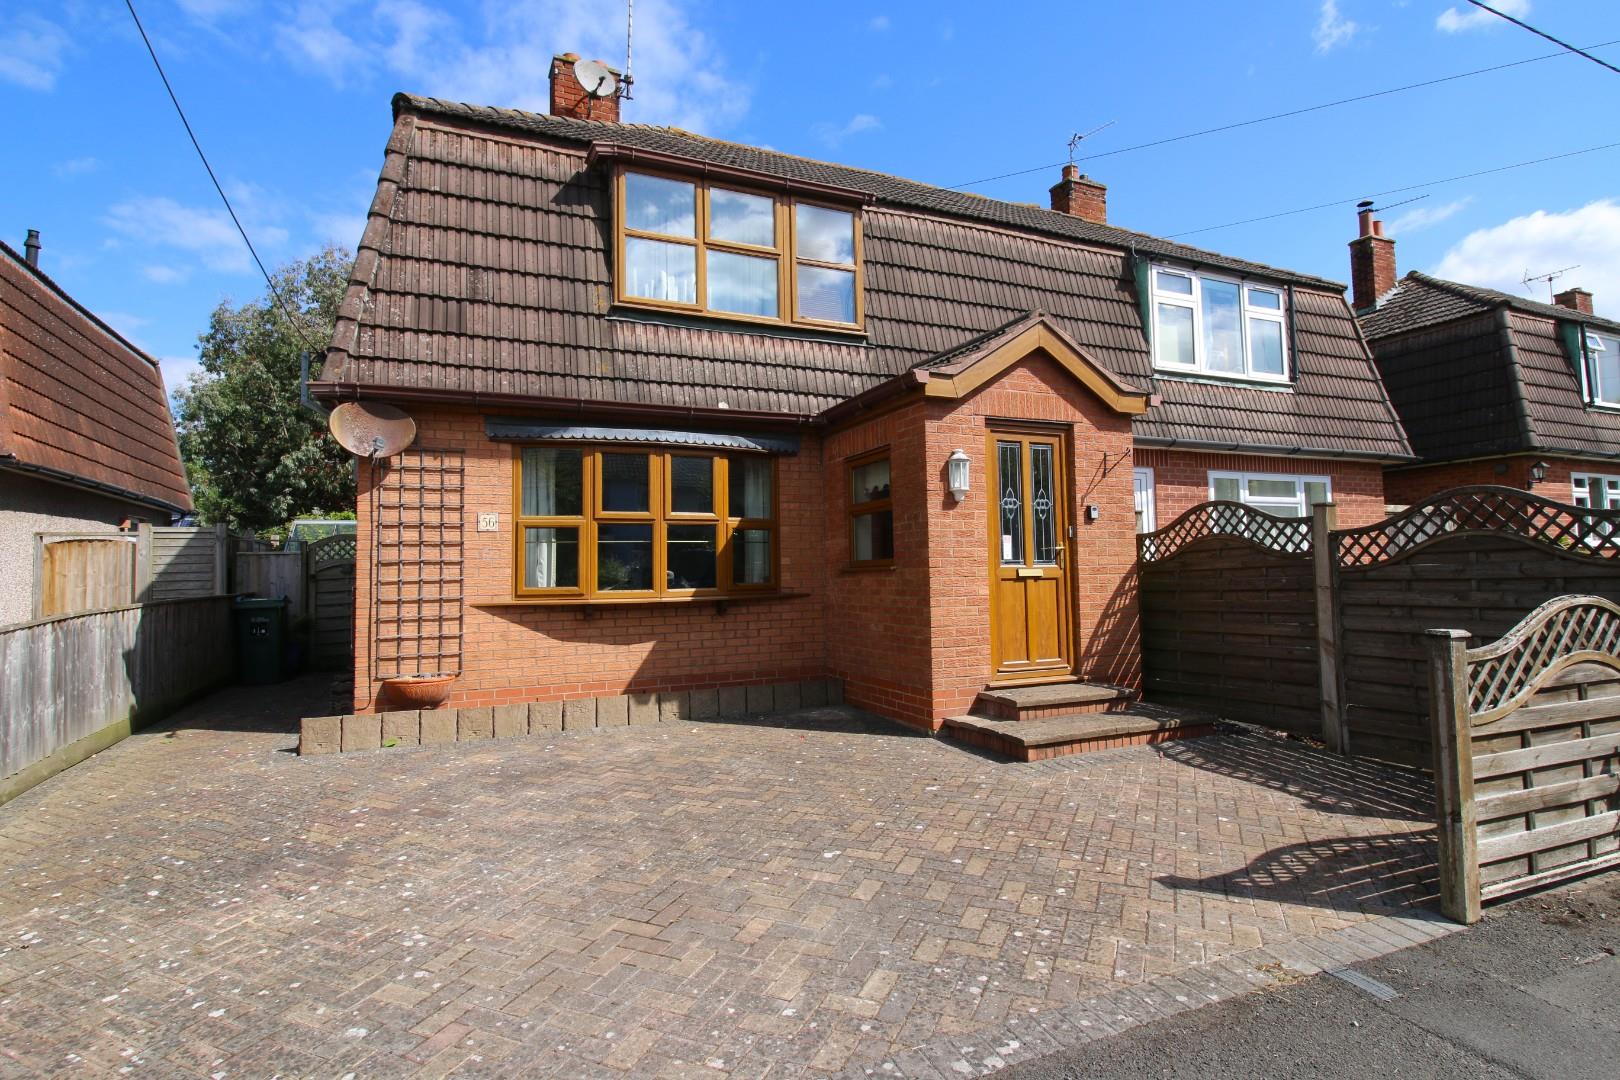 Three bedroom semi-detached family home requiring modernisation